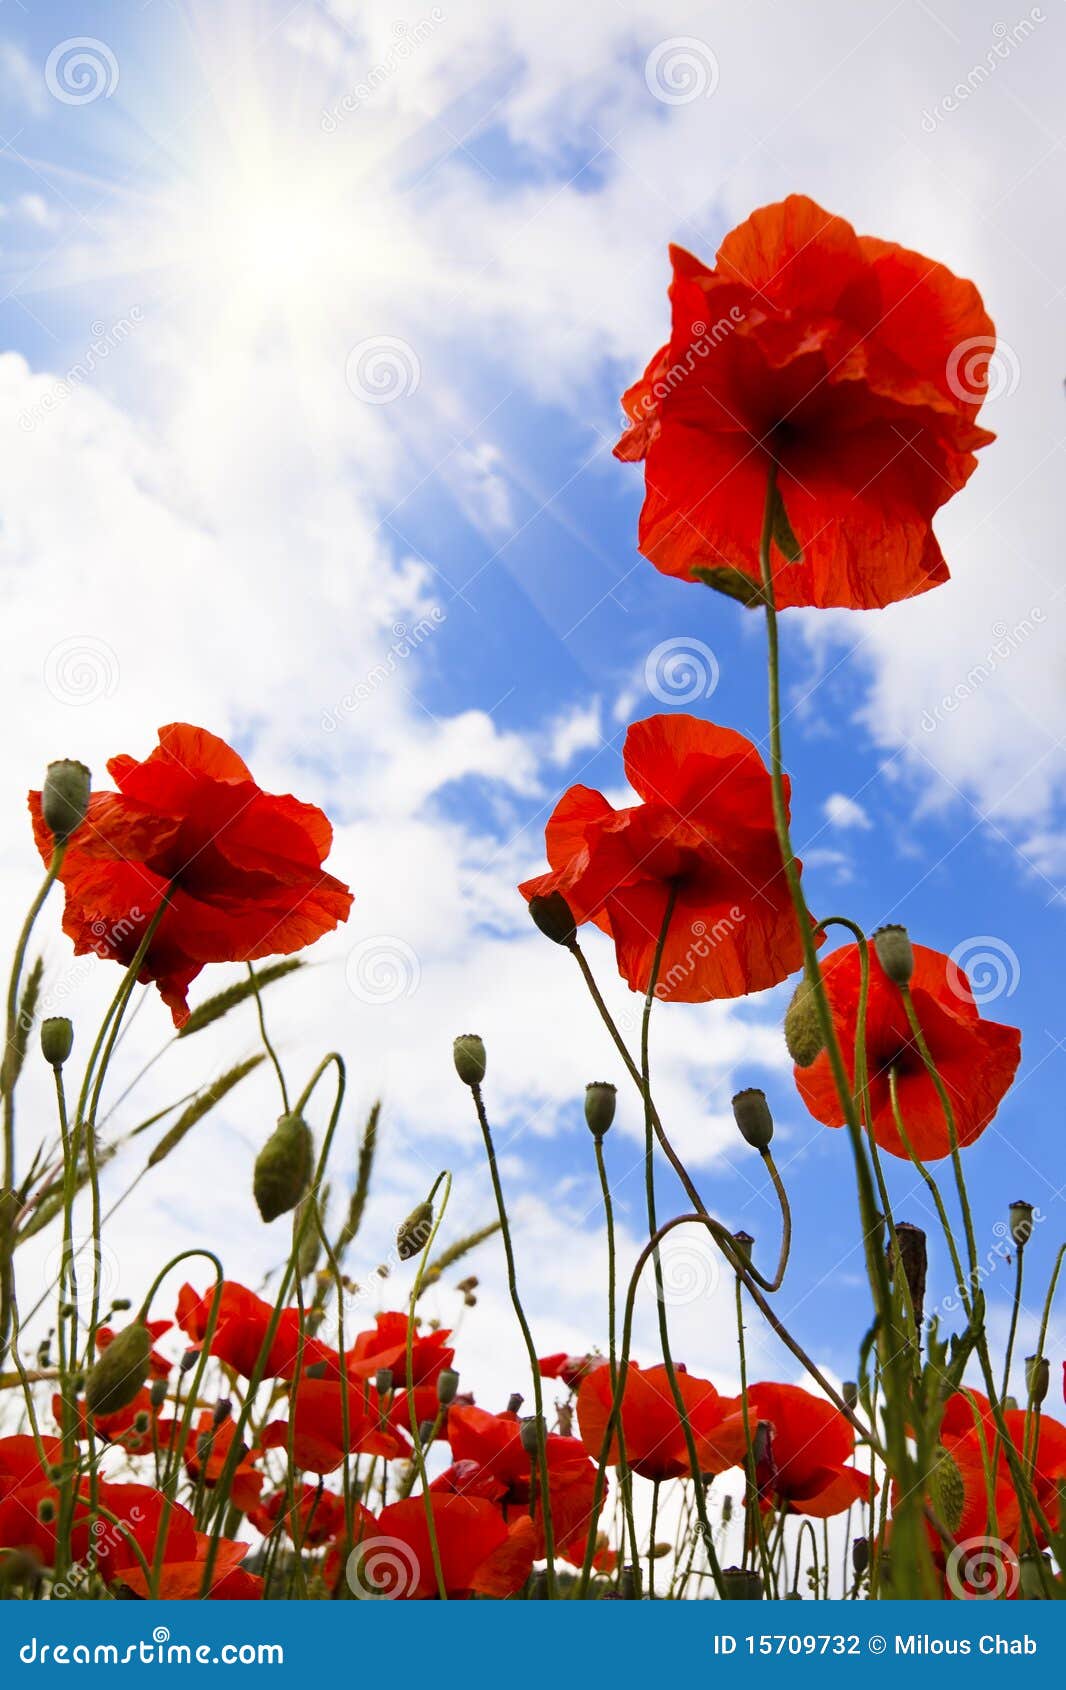 red poppies in meadow